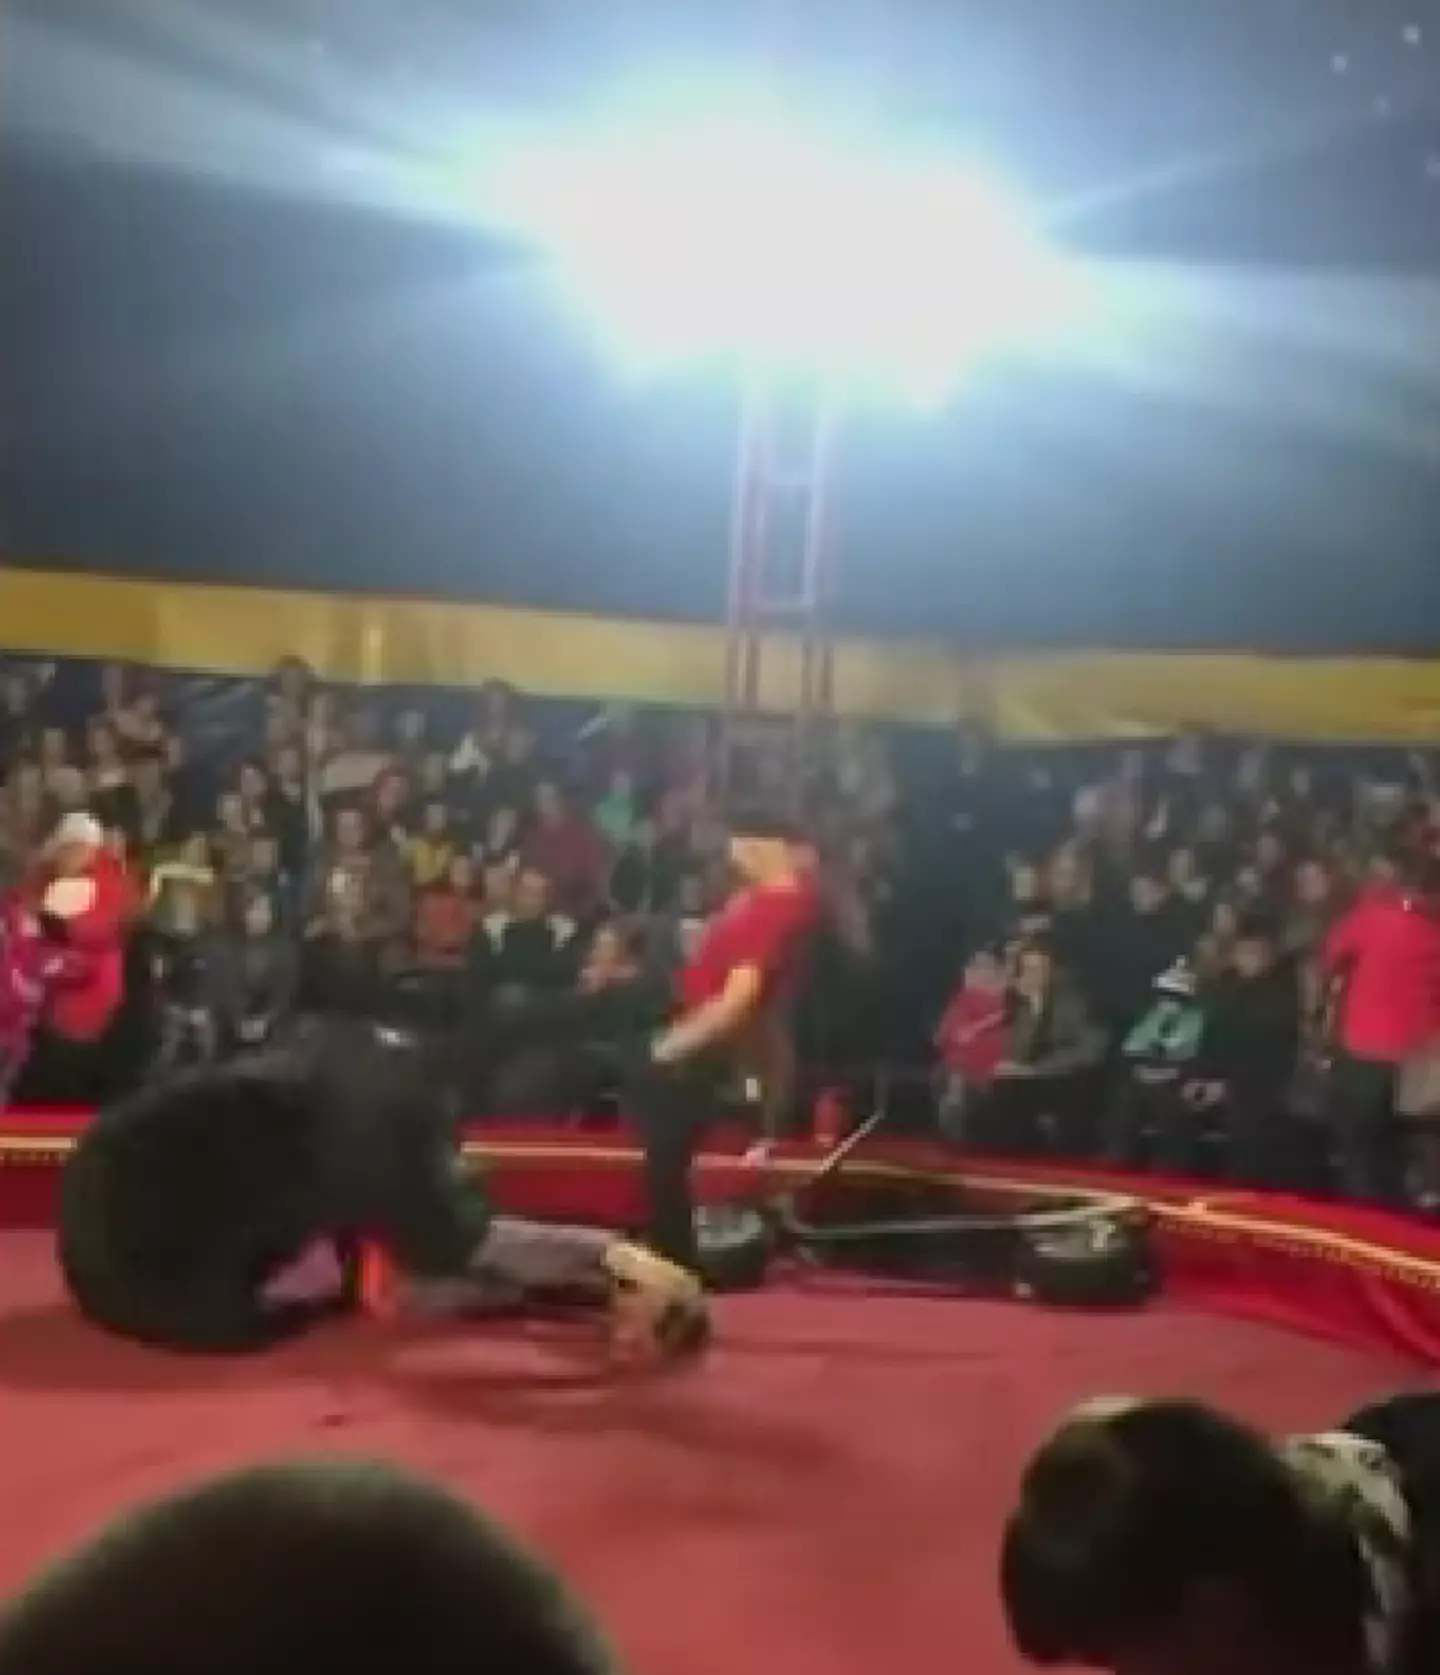 The bear attacked the trainer as they were performing their act to a large crowd.